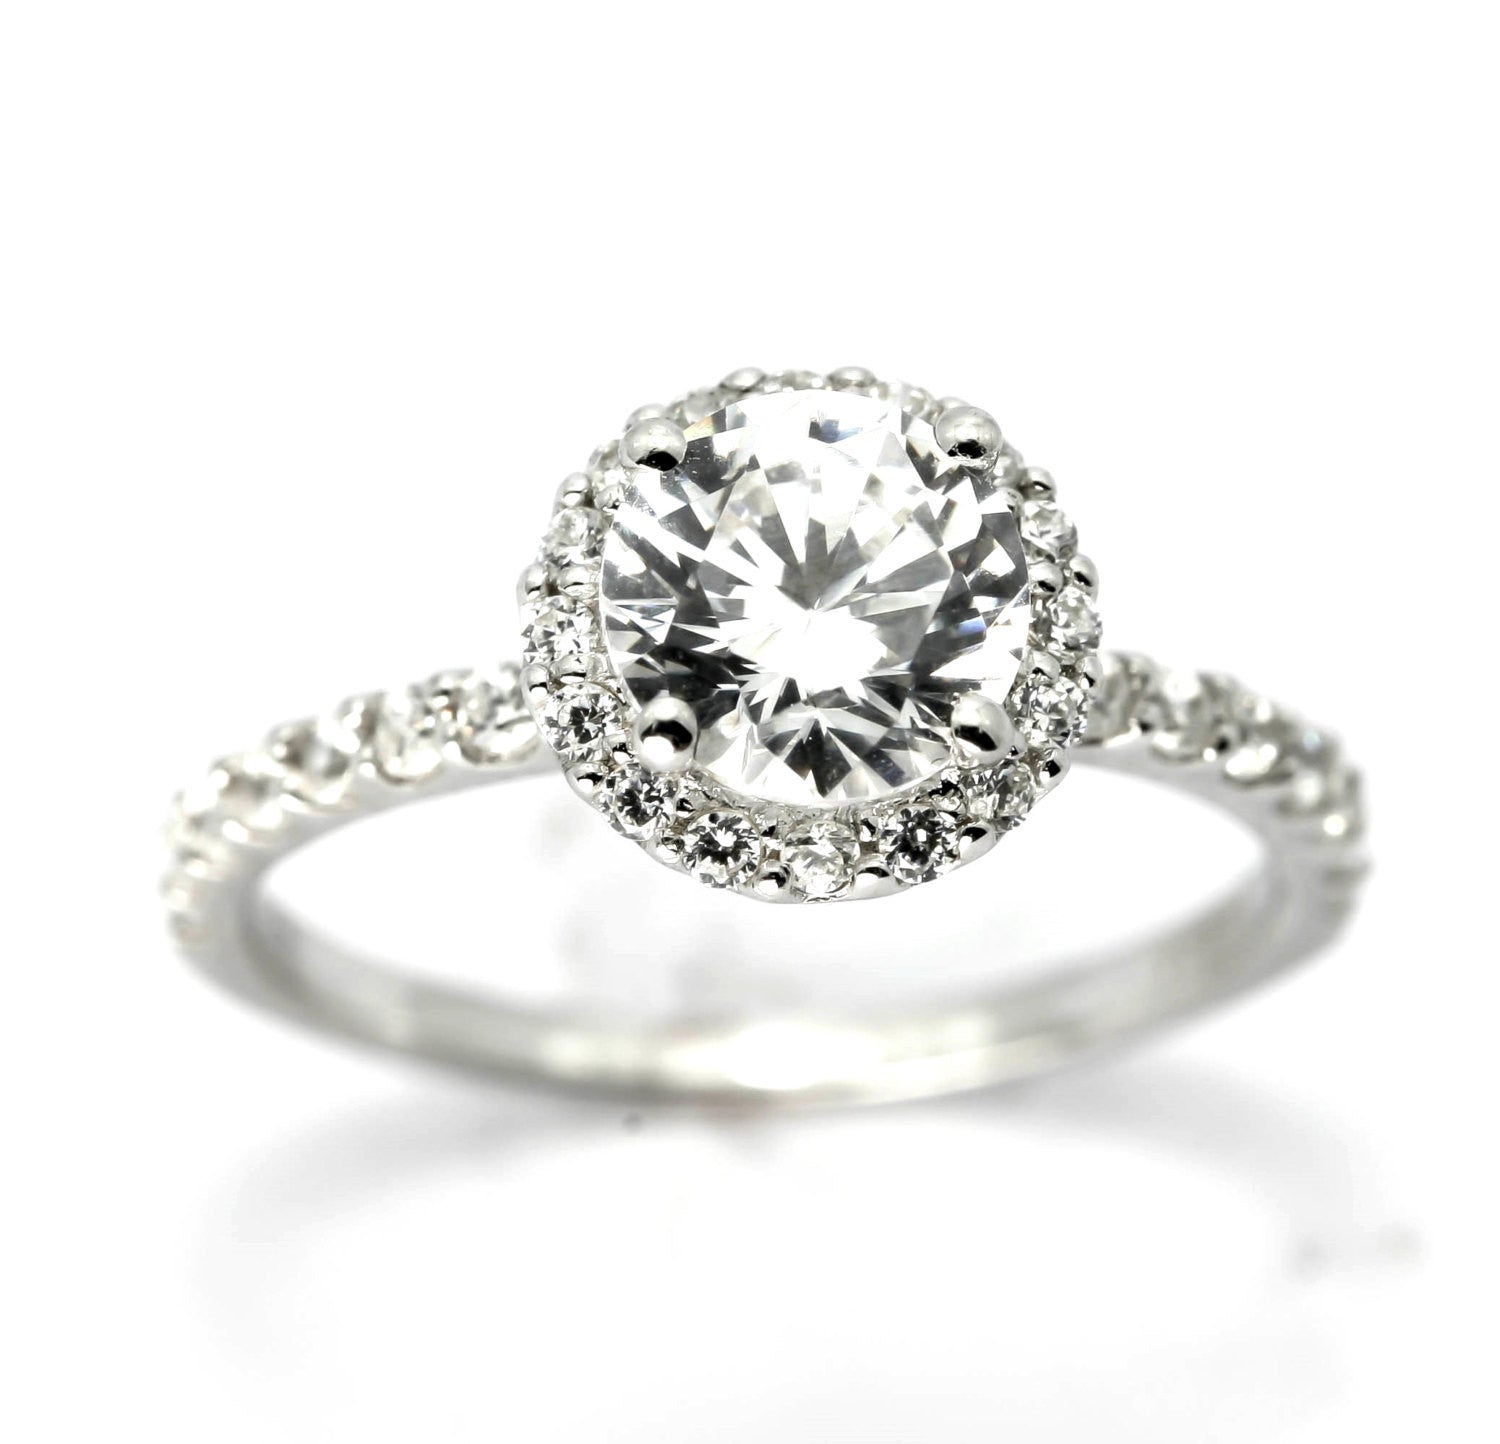 Semi Mount Engagement Ring, Unique Floating Halo For 1 Carat Center Stone, Has .45 Carat Diamonds, Anniversary Ring - Y11659